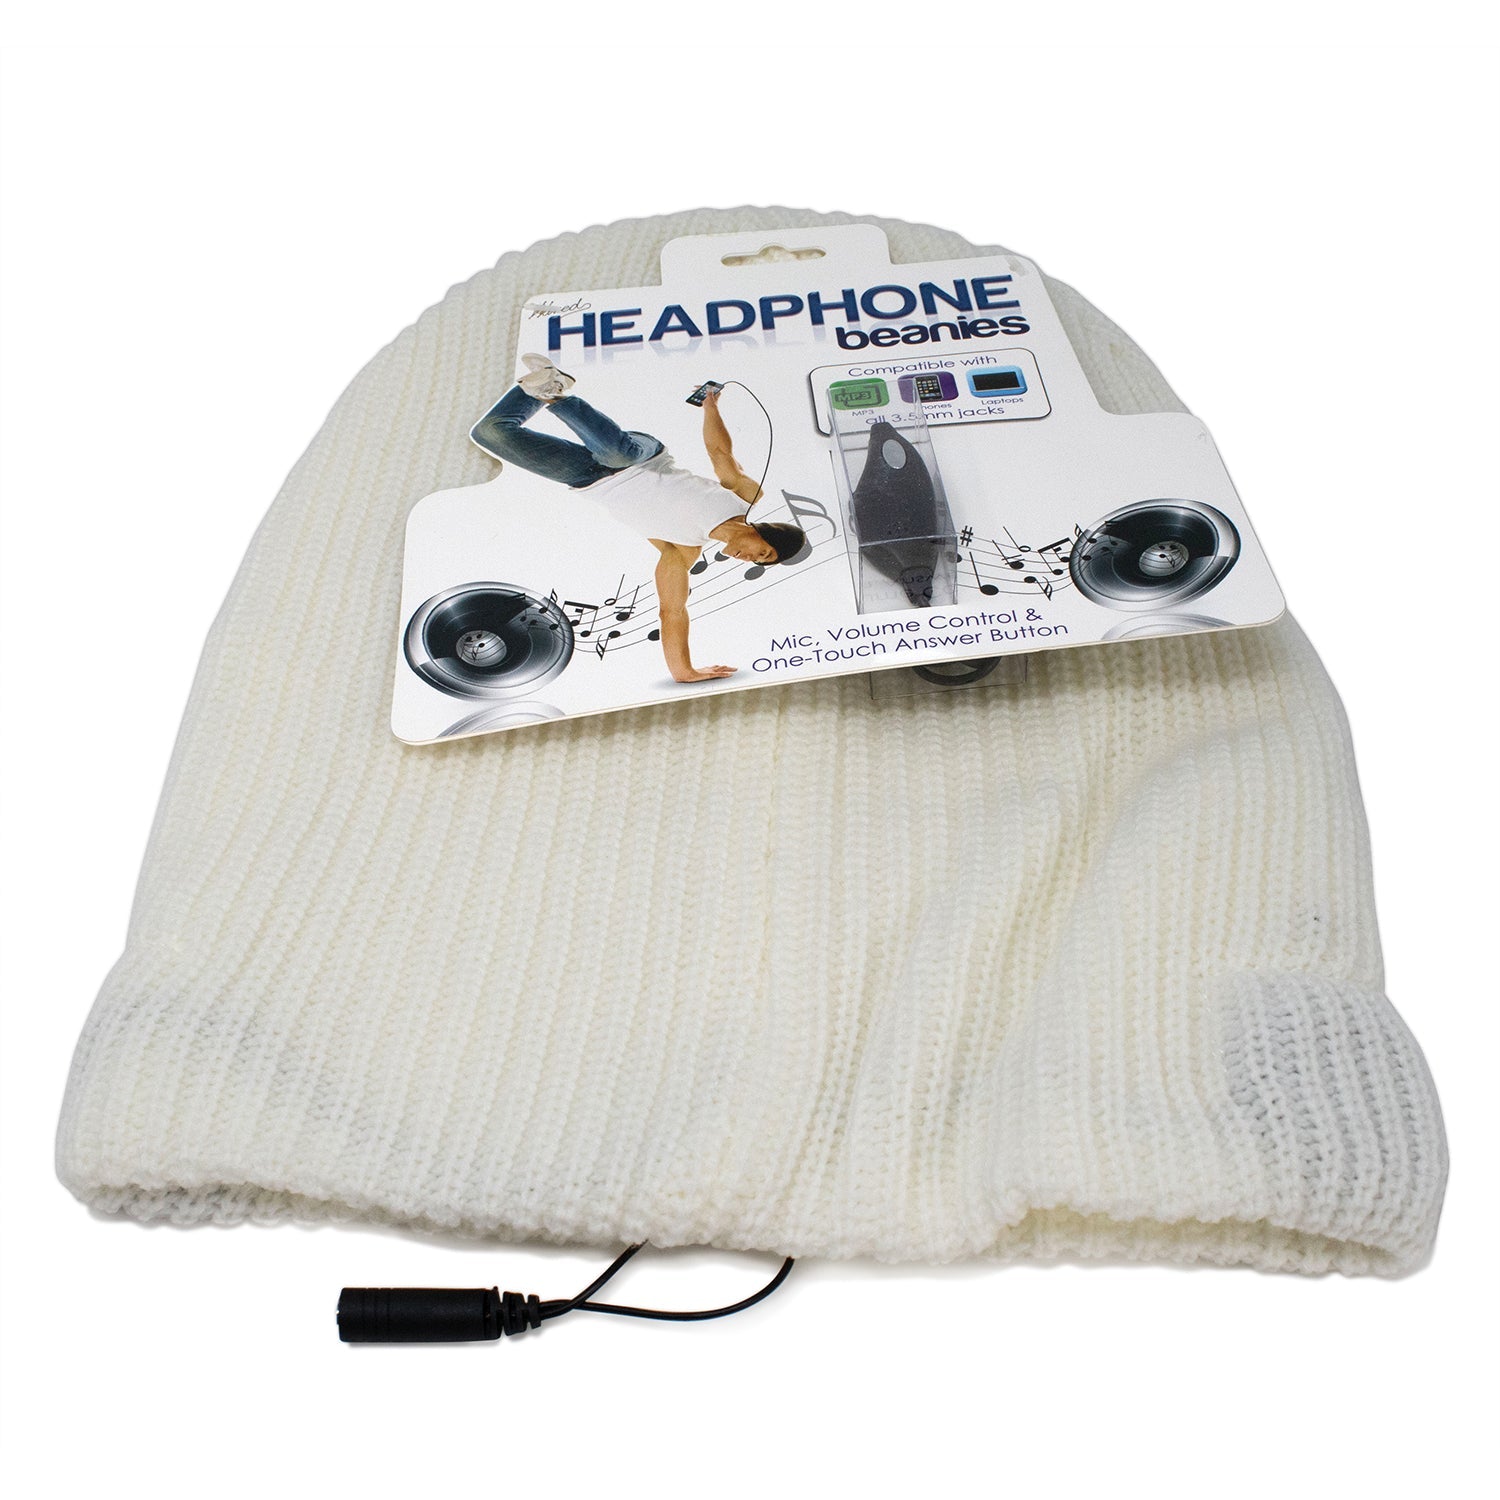 Off white knit Headphone Beanie caps with headphone jack and comfortable, hidden speakers. 